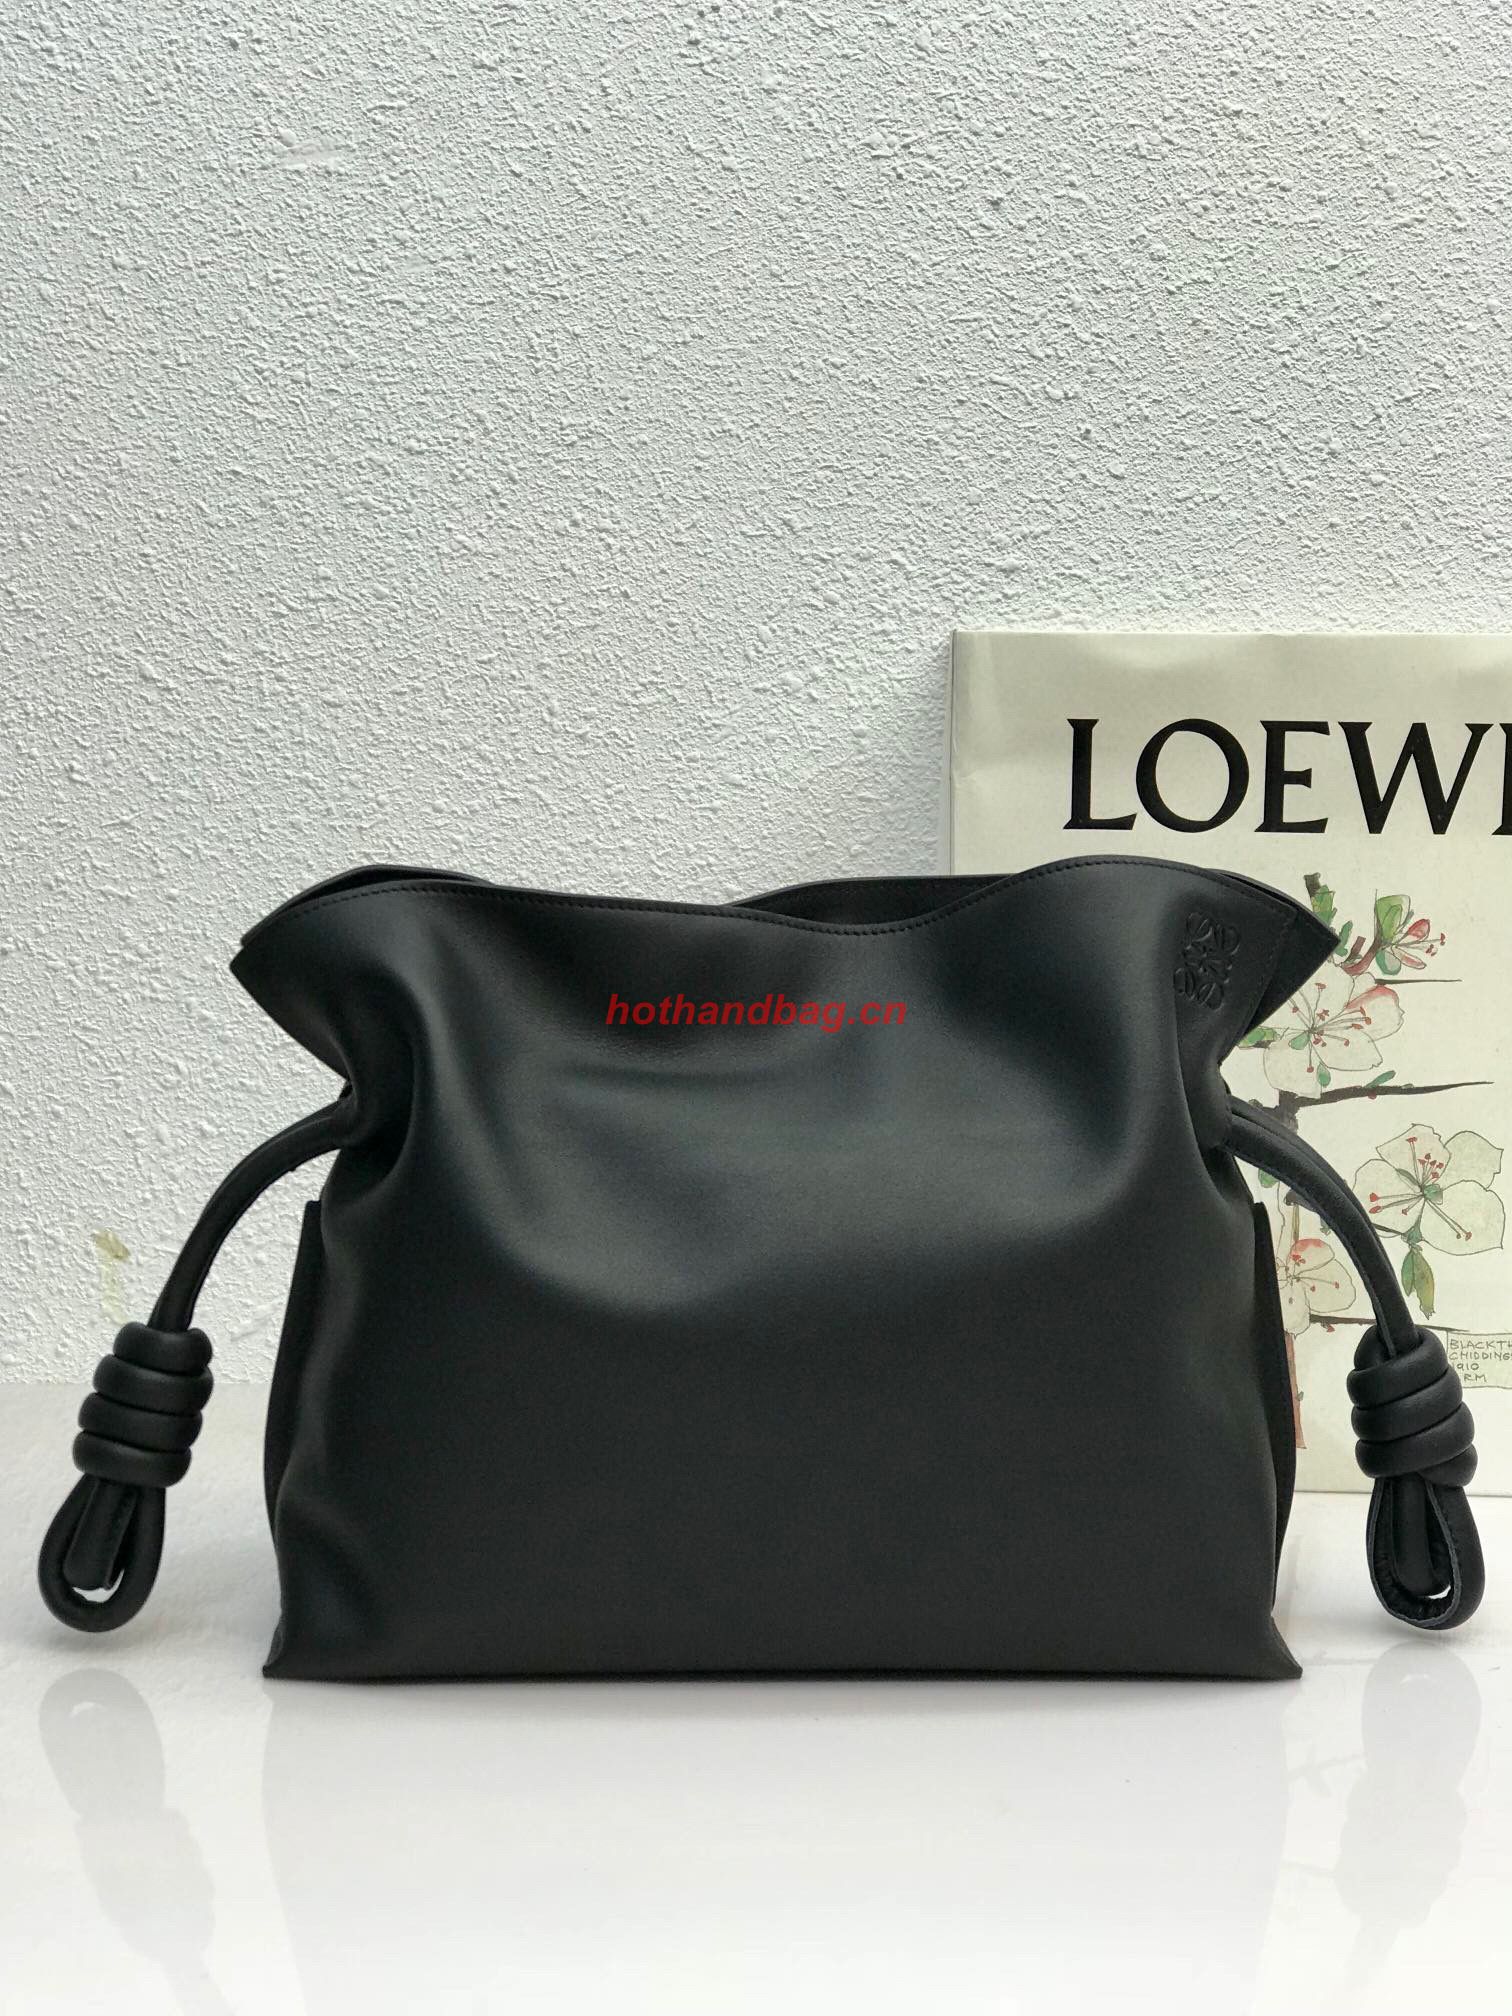 Loewe Lucky Bags Original Leather LE10199 Black